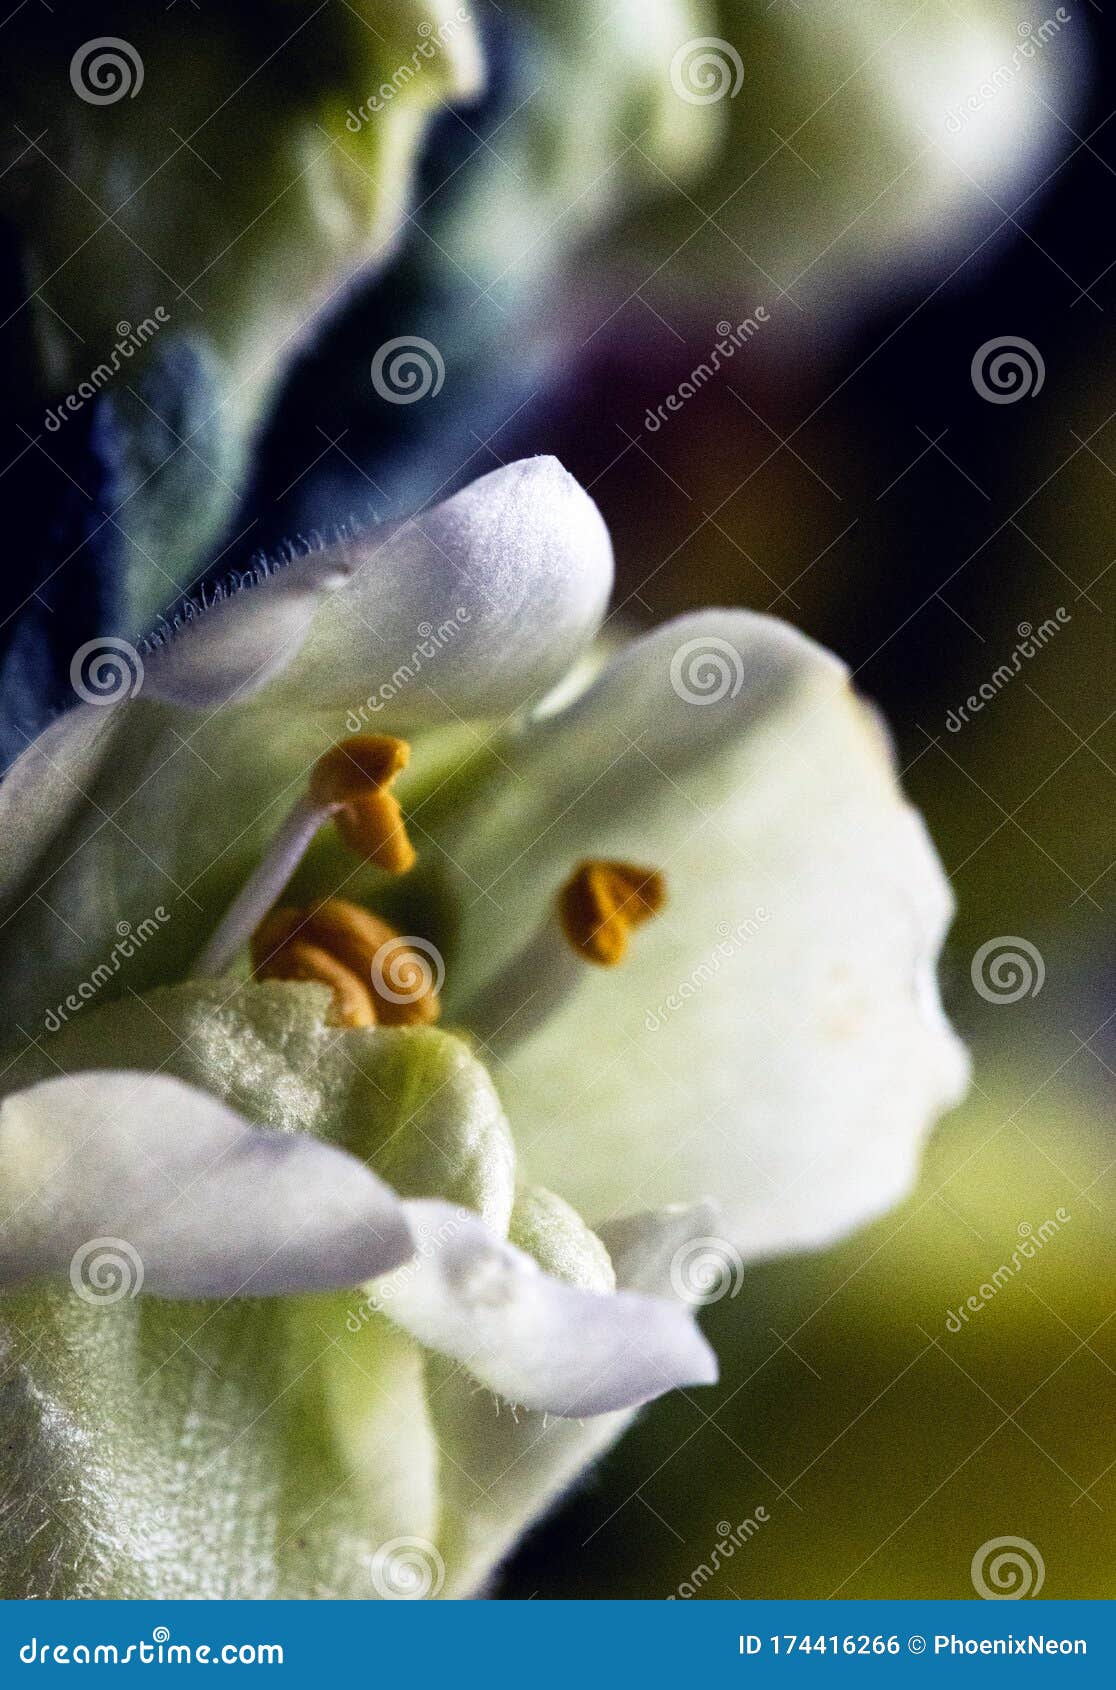 Romantic Artistic Closeup with Soft Focus Bouquet of Tender Blooming ...